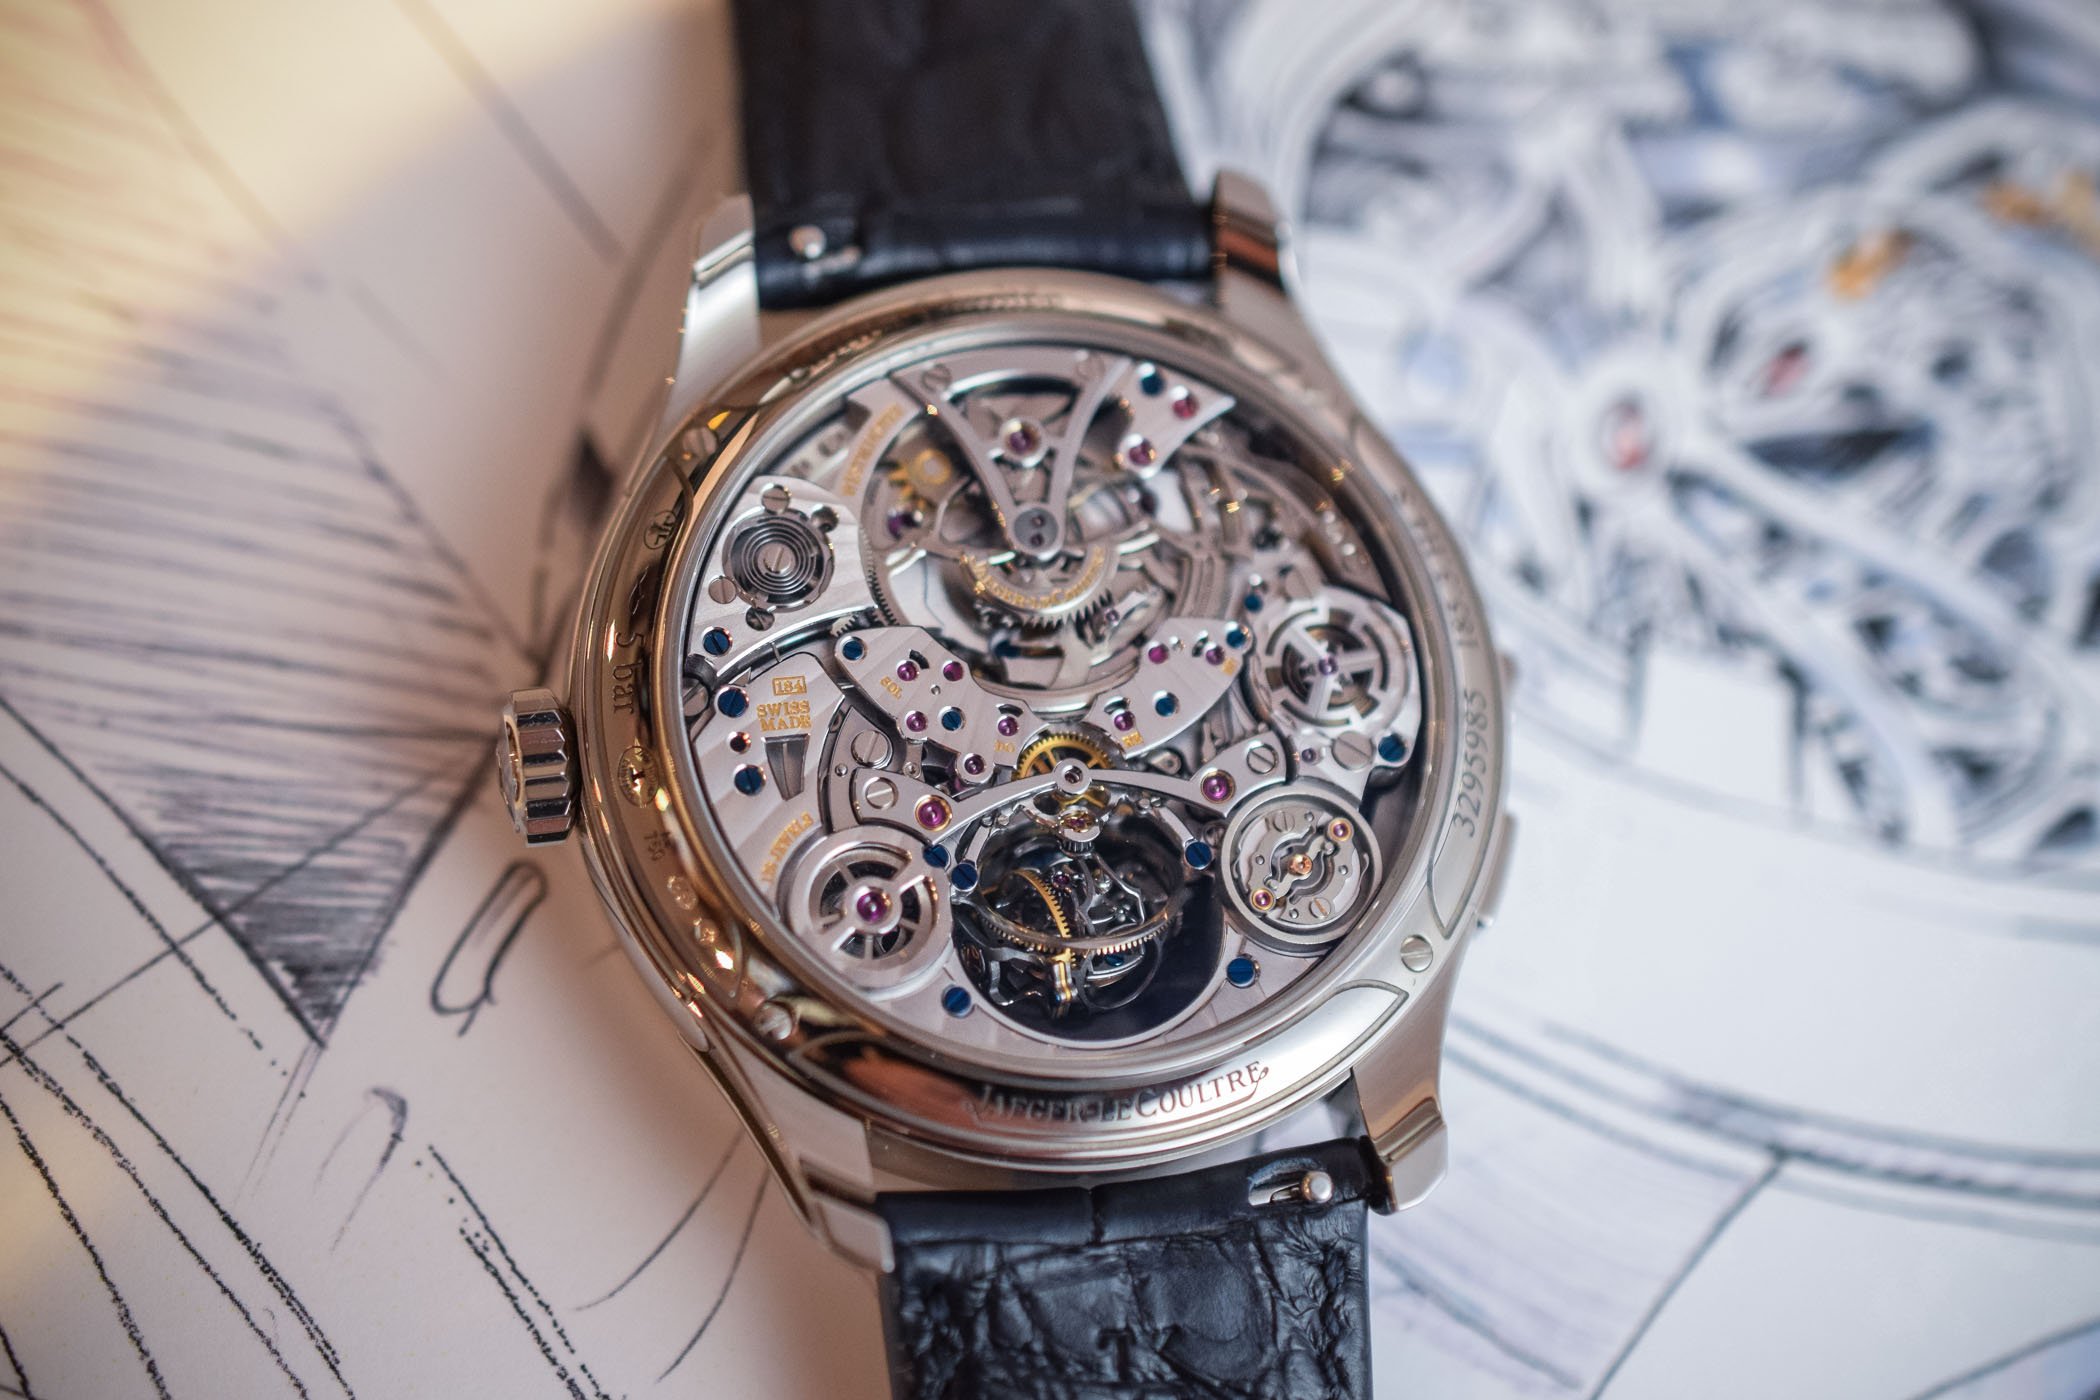 Jaeger LeCoultre SIHH 2019 - 6